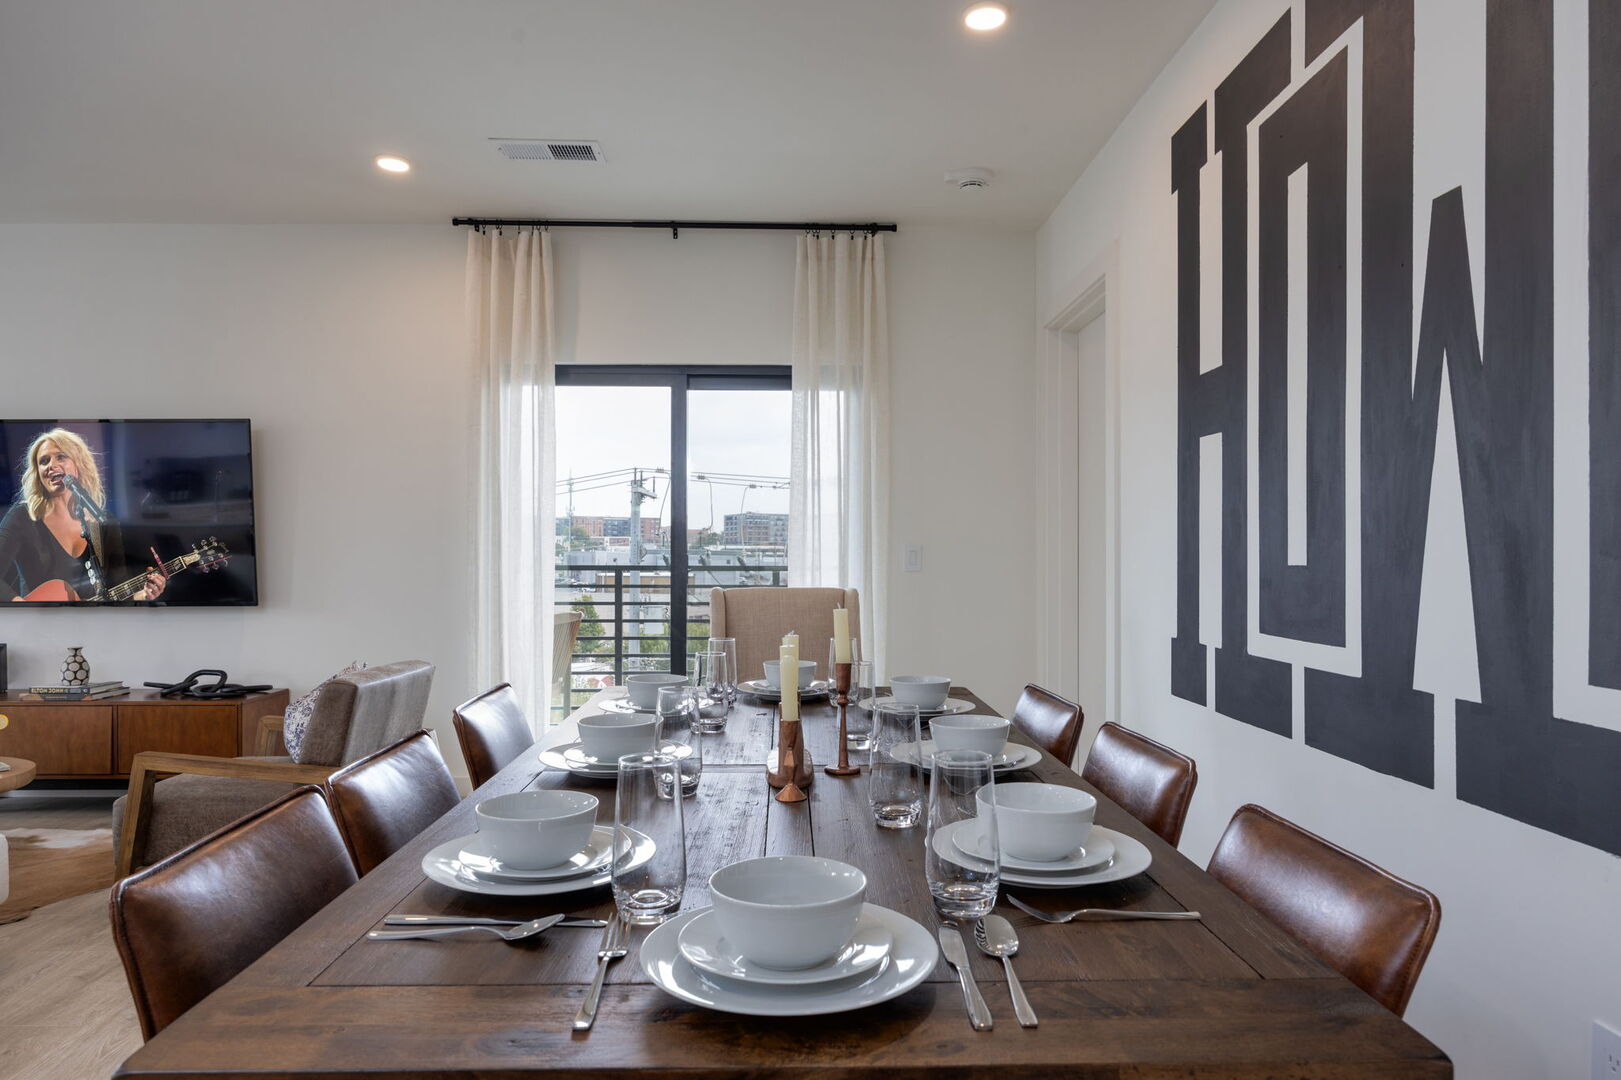 Inviting dining area for 8, perfect for enjoying a meal with family and friends.